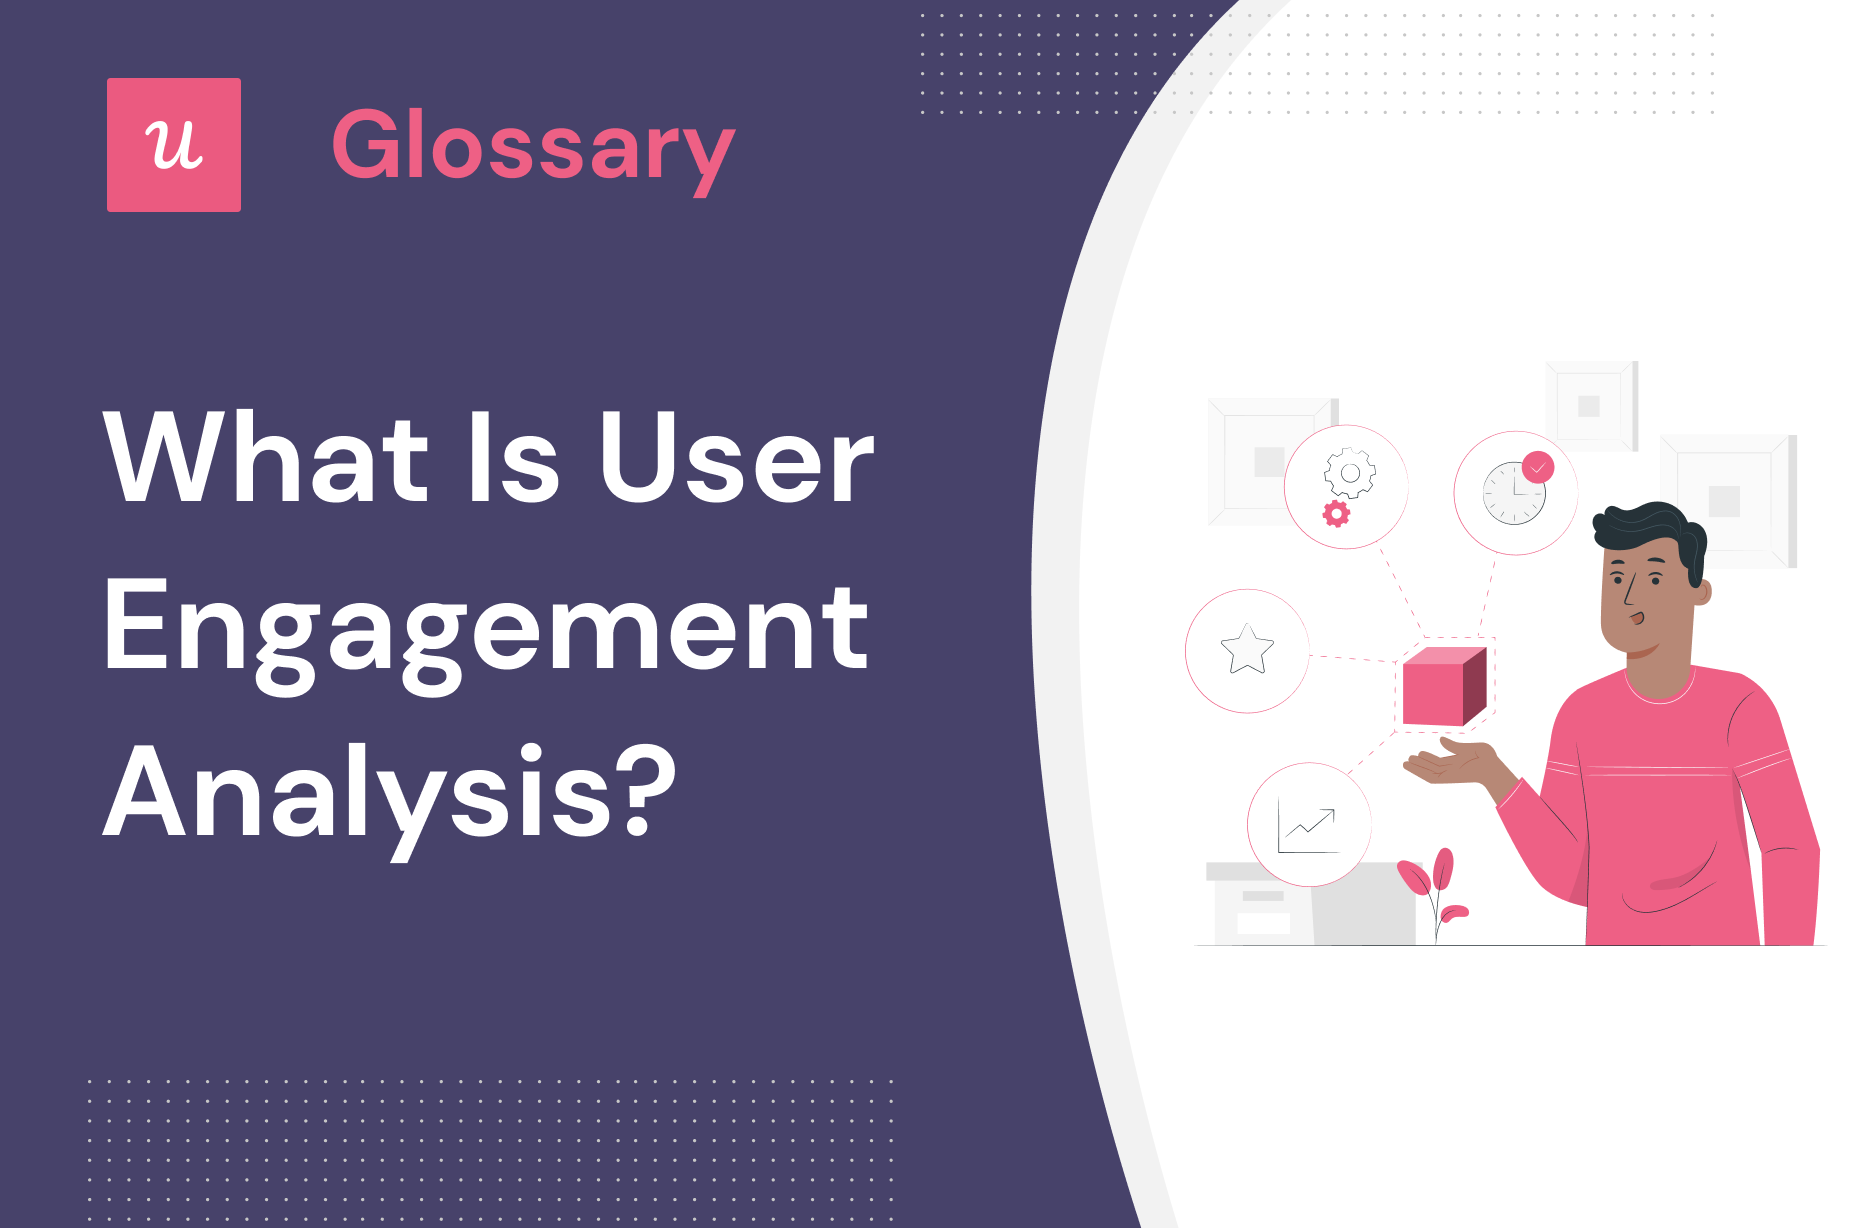 What is User Engagement Analysis?